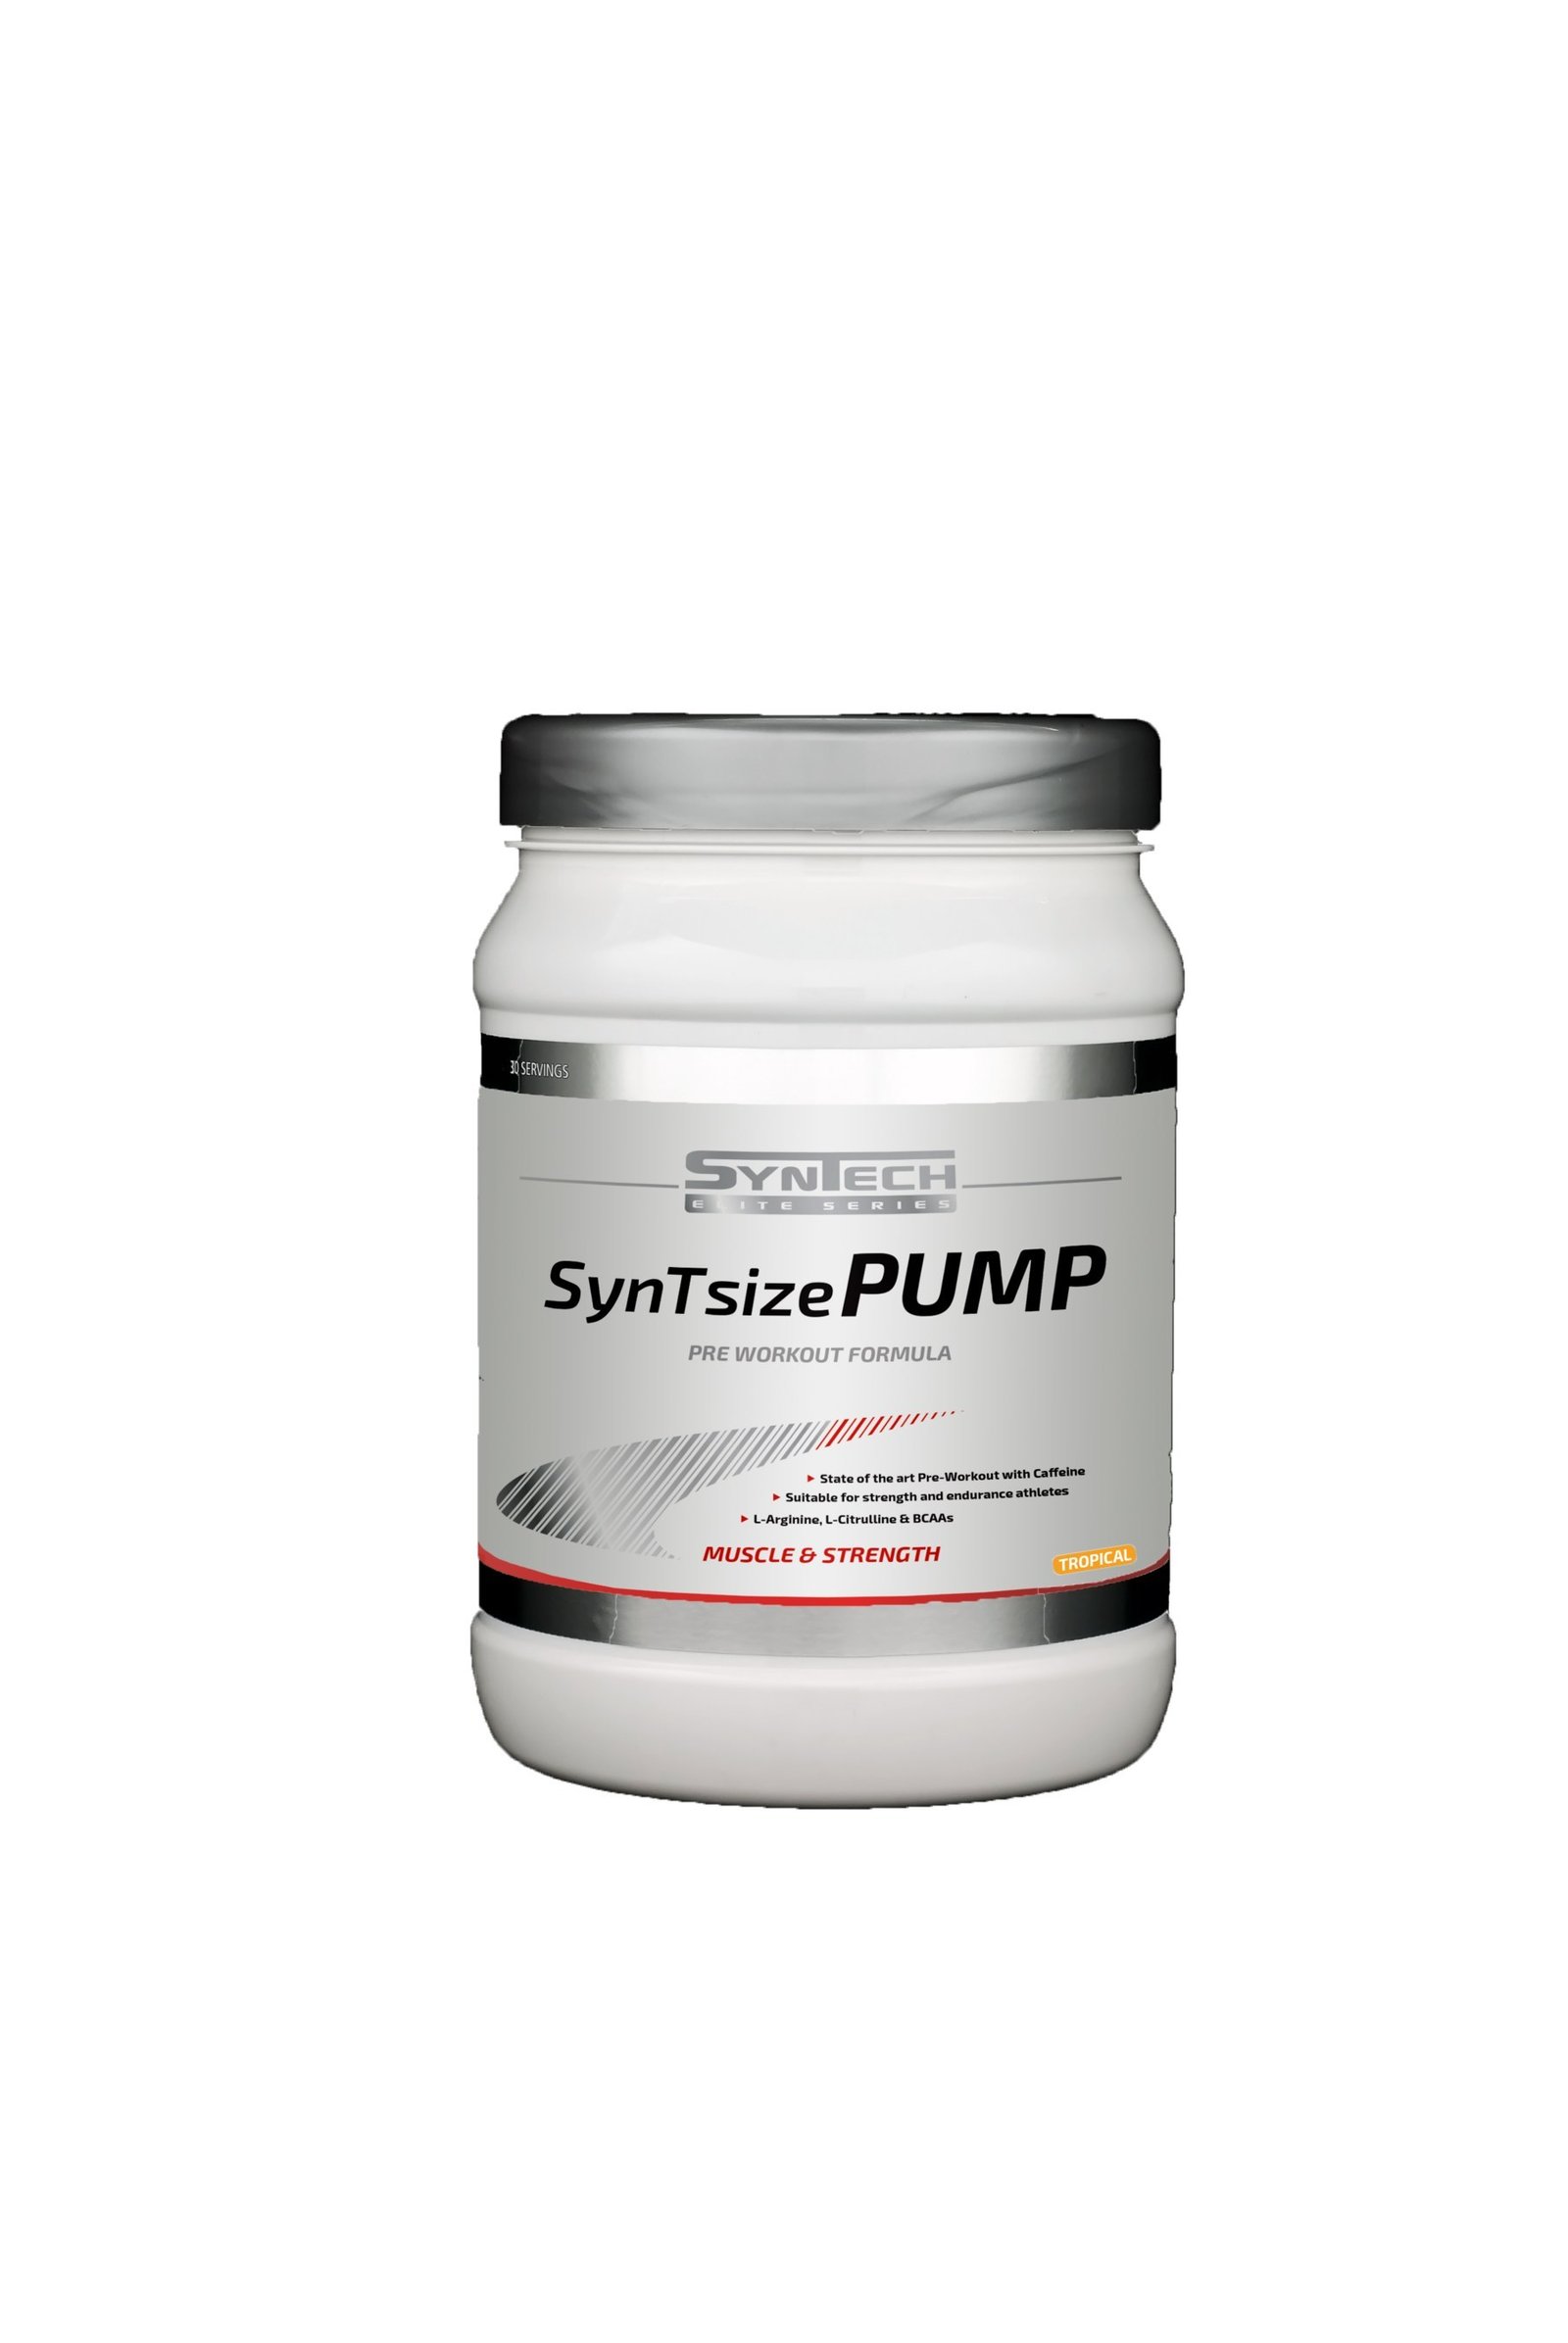 SynTech Nutrition launches all-in-one pre-workout supplement